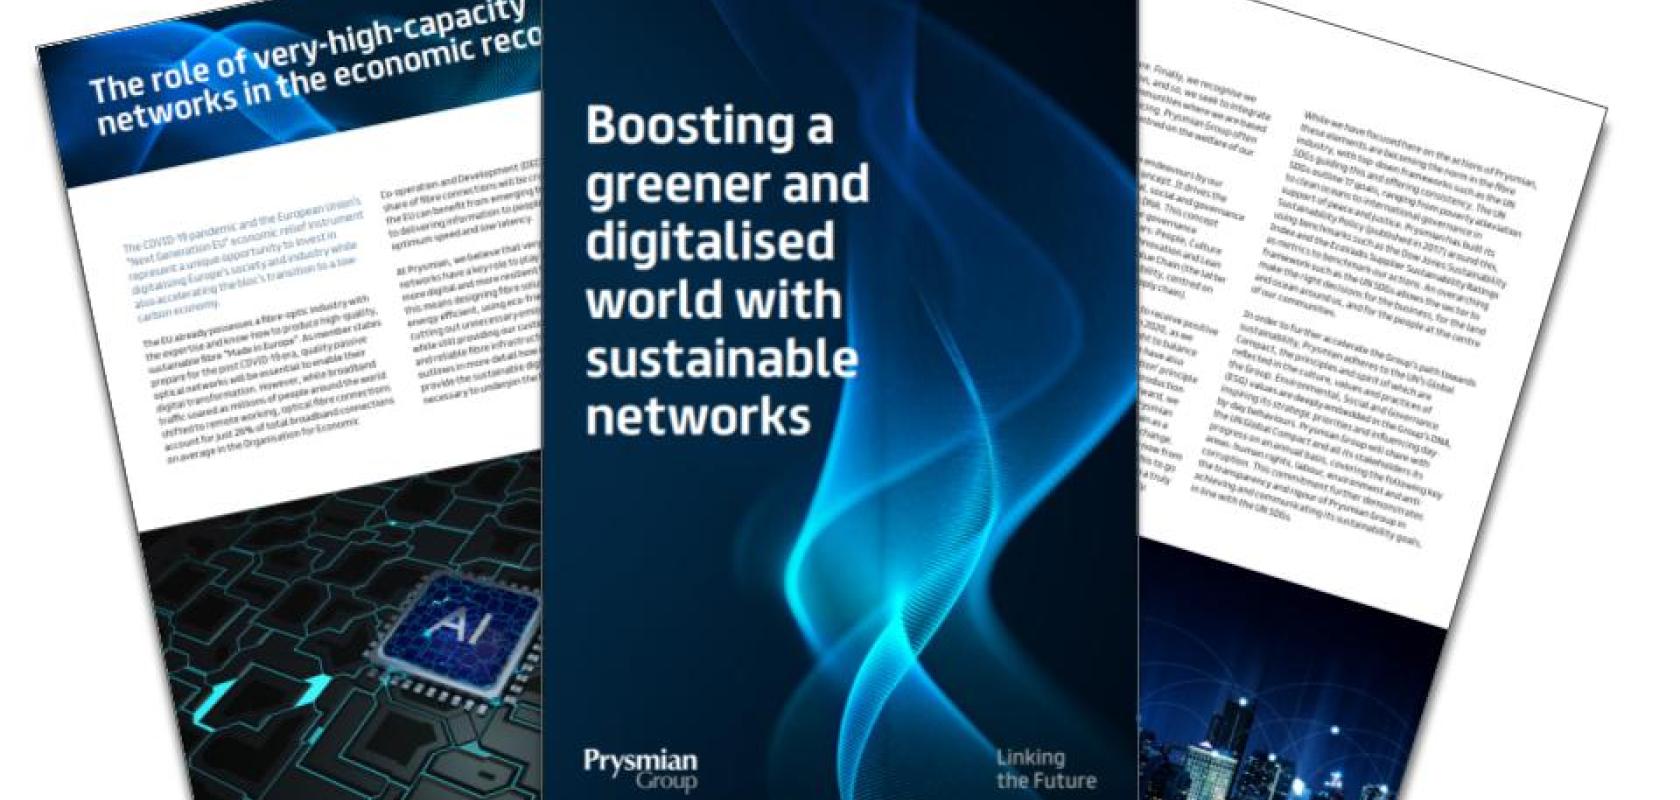 Boosting a greener and digitalised world with sustainable networks